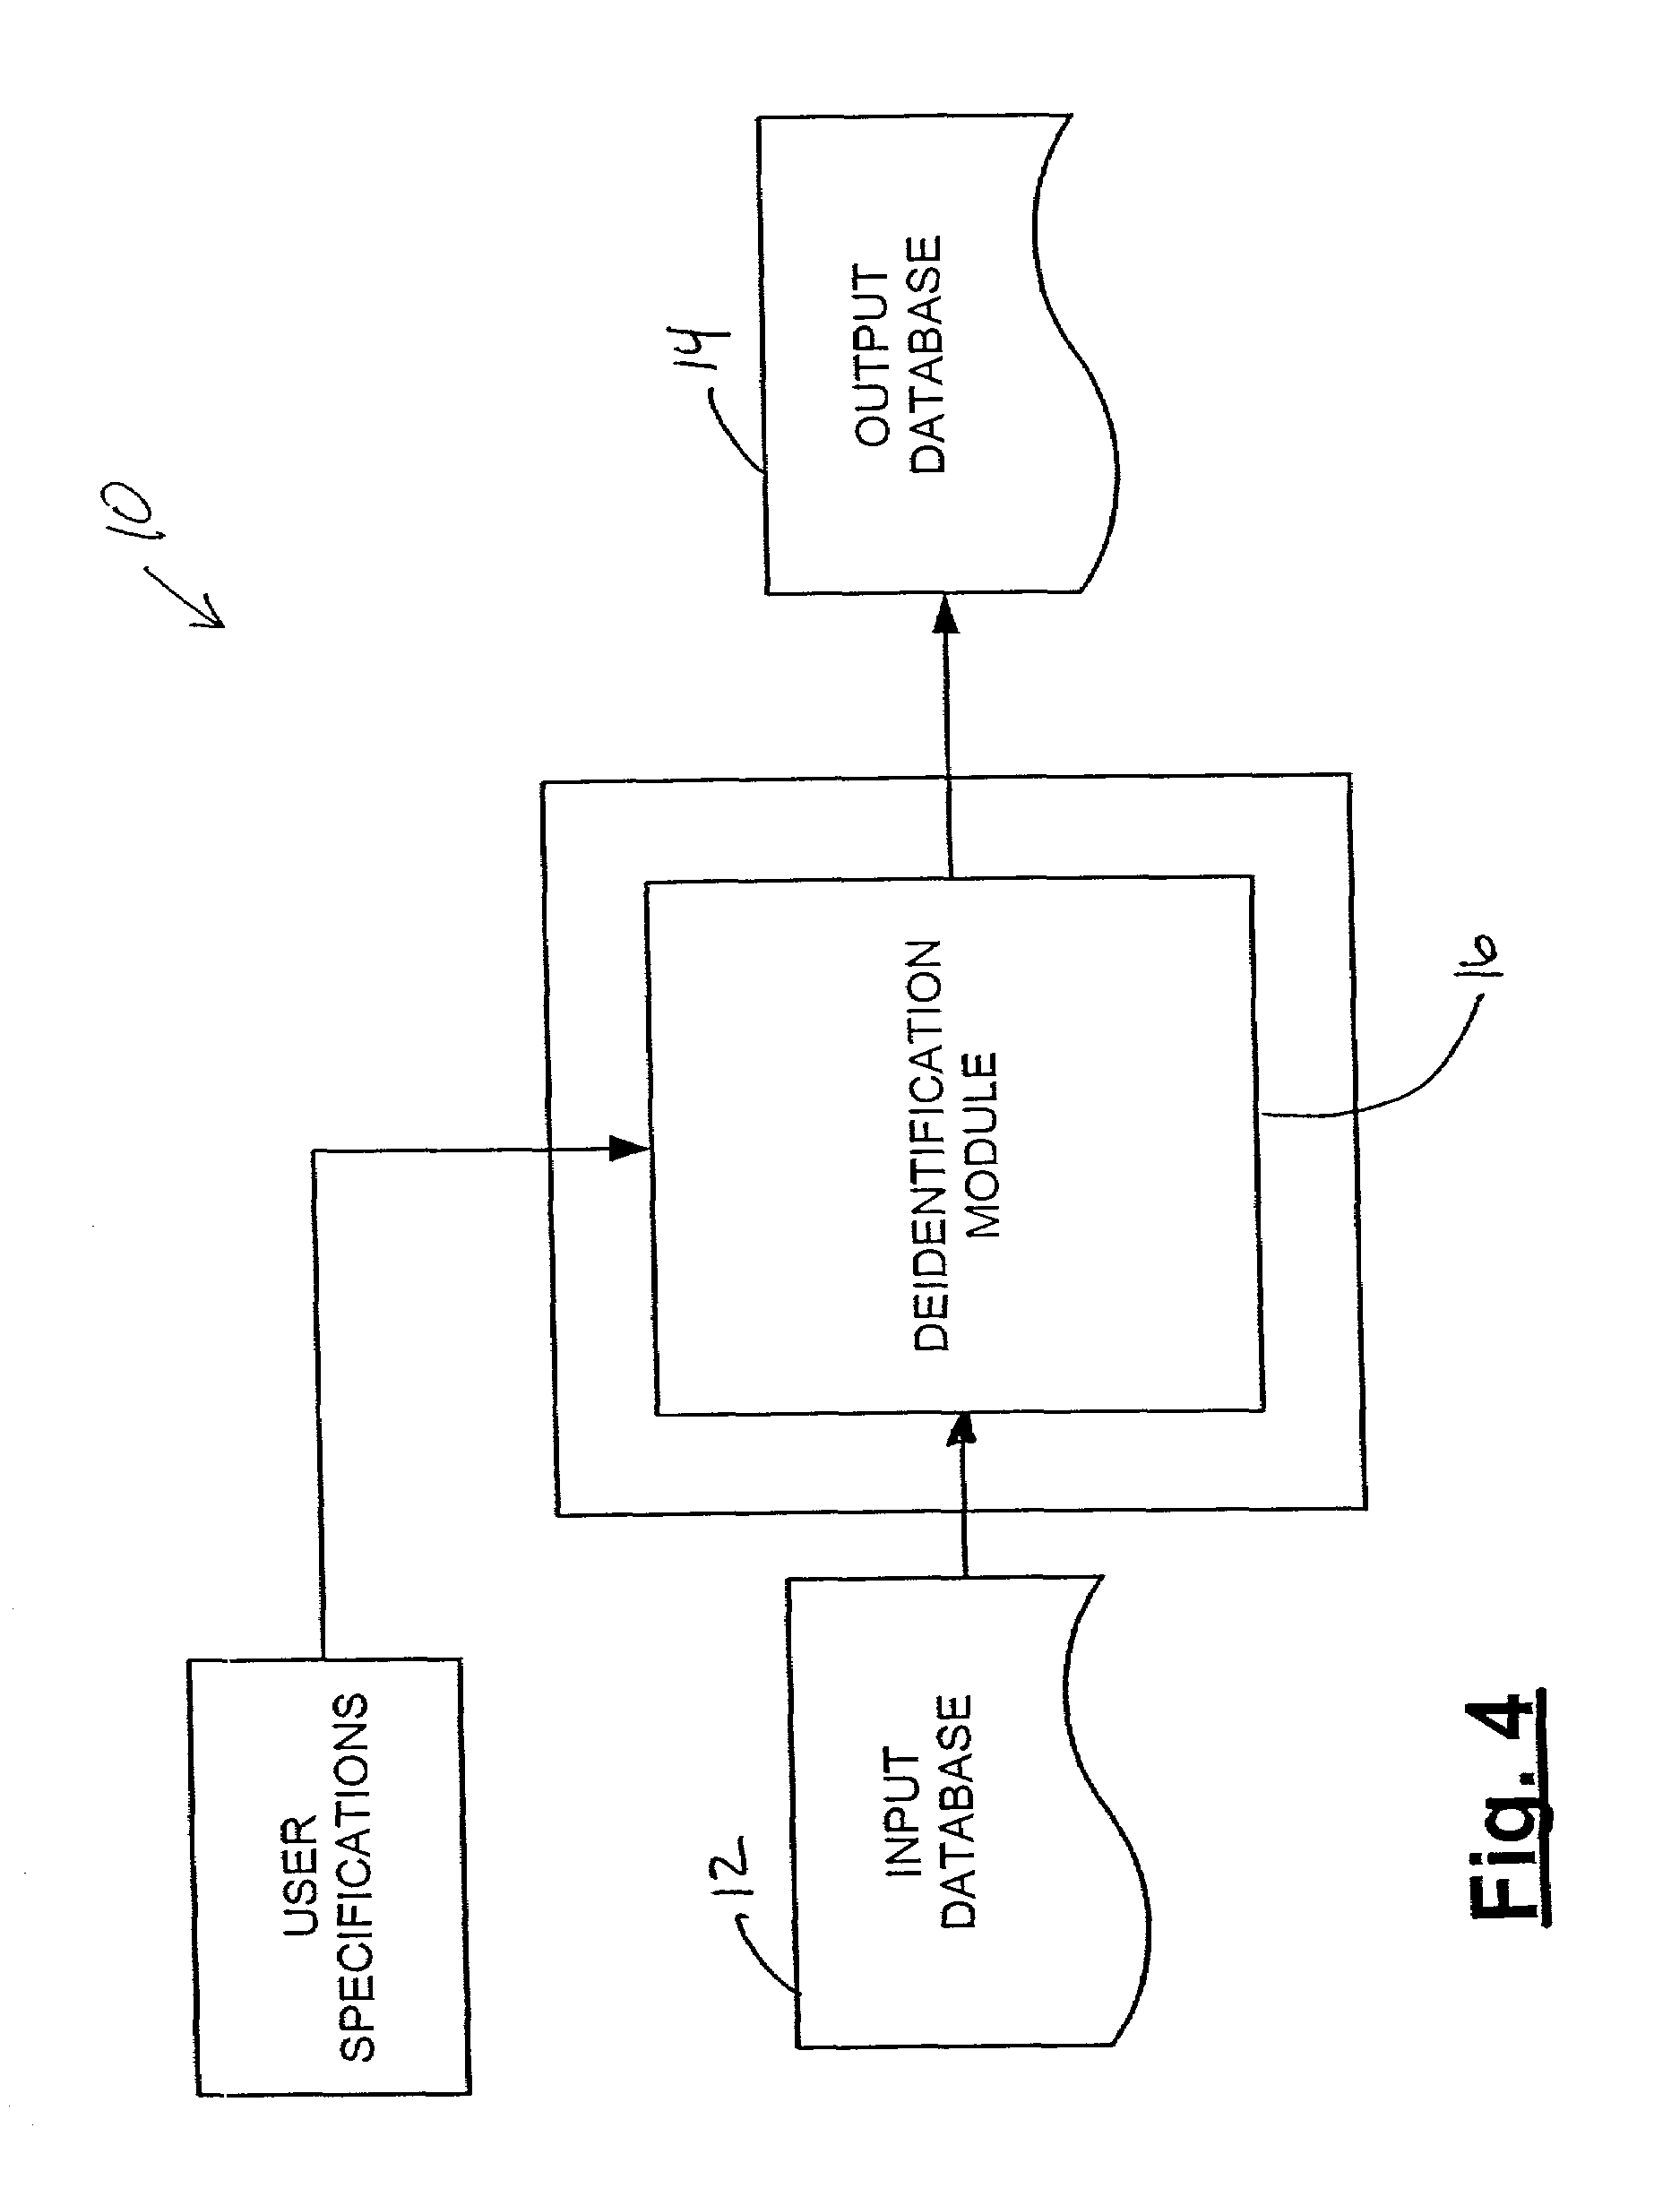 Systems and methods for deidentifying entries in a data source